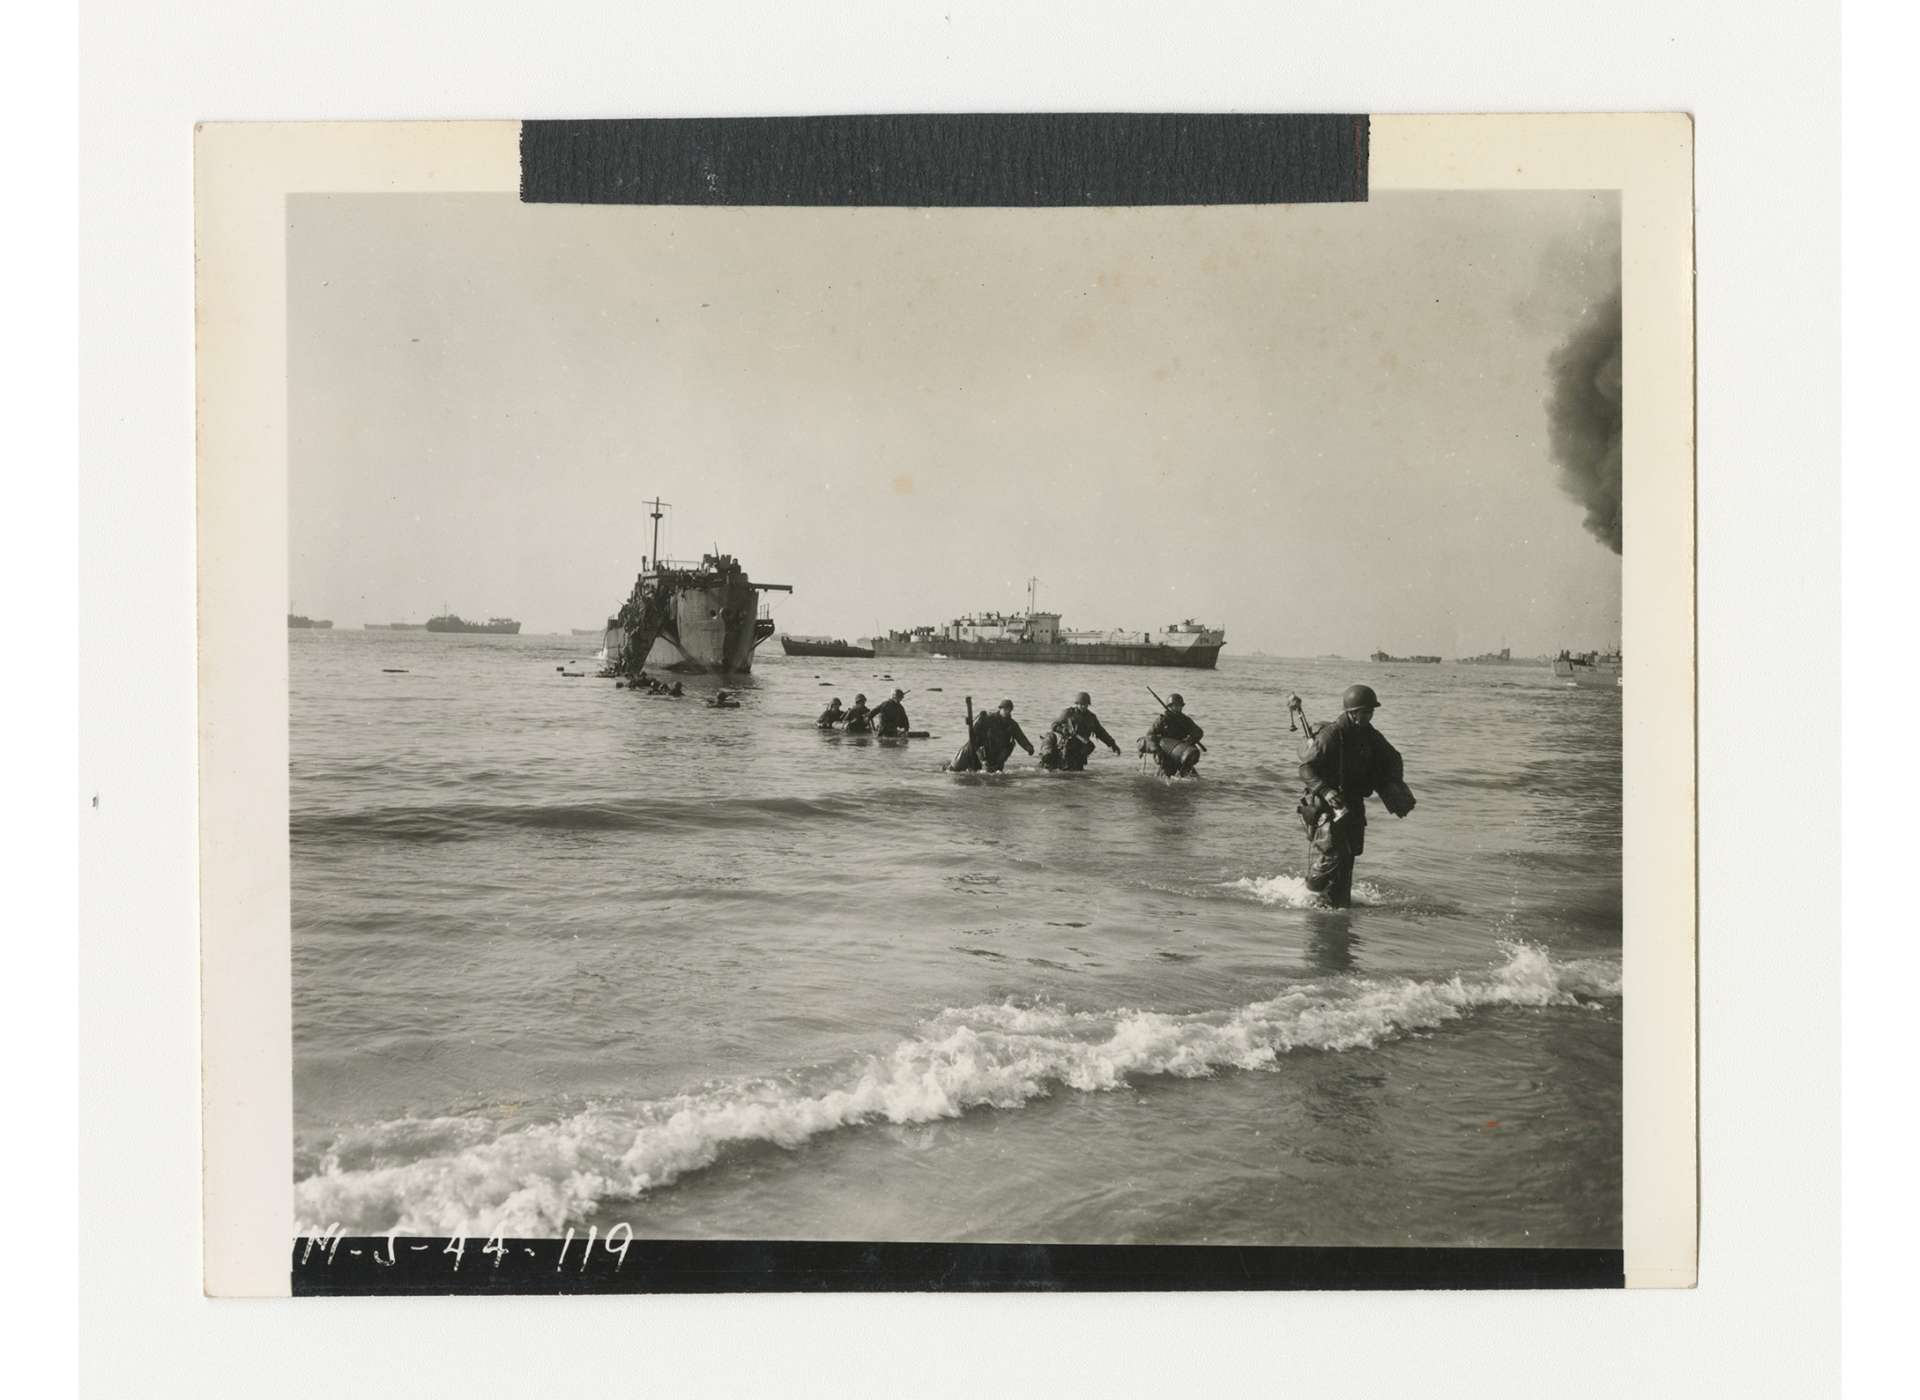 Troops of US Fifth Army come ashore at Anzio, January 23, 1944. Gift of Ms. Regan Forrester, from the Collection of The National WWII Museum, 2002.337.066.